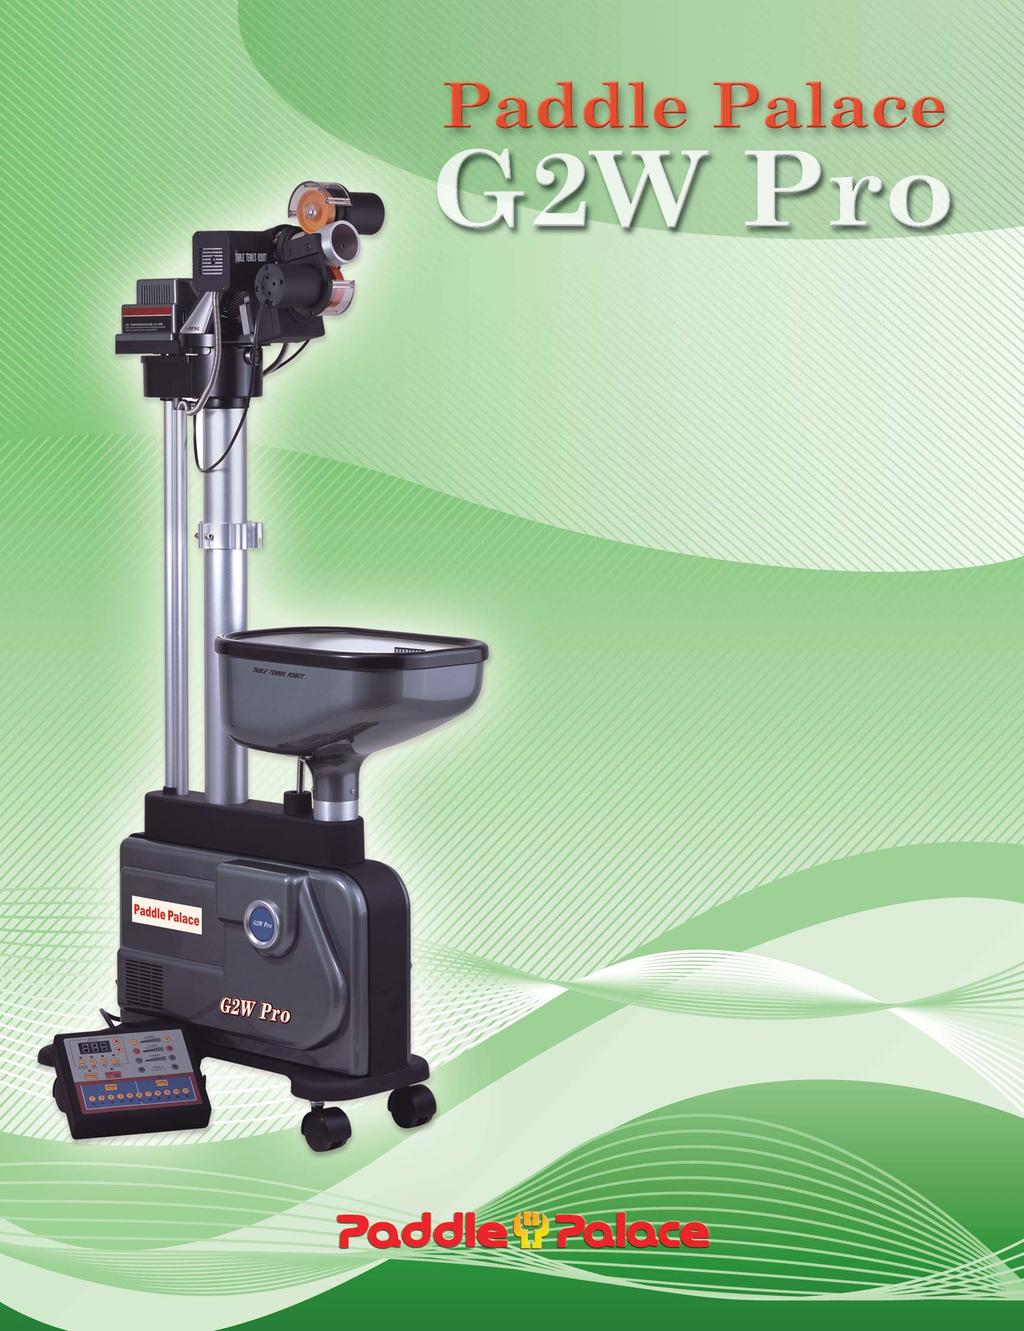 Putting Robot Technology to Work for You The Paddle Palace G2W Pro robot is everything you need in a robot!